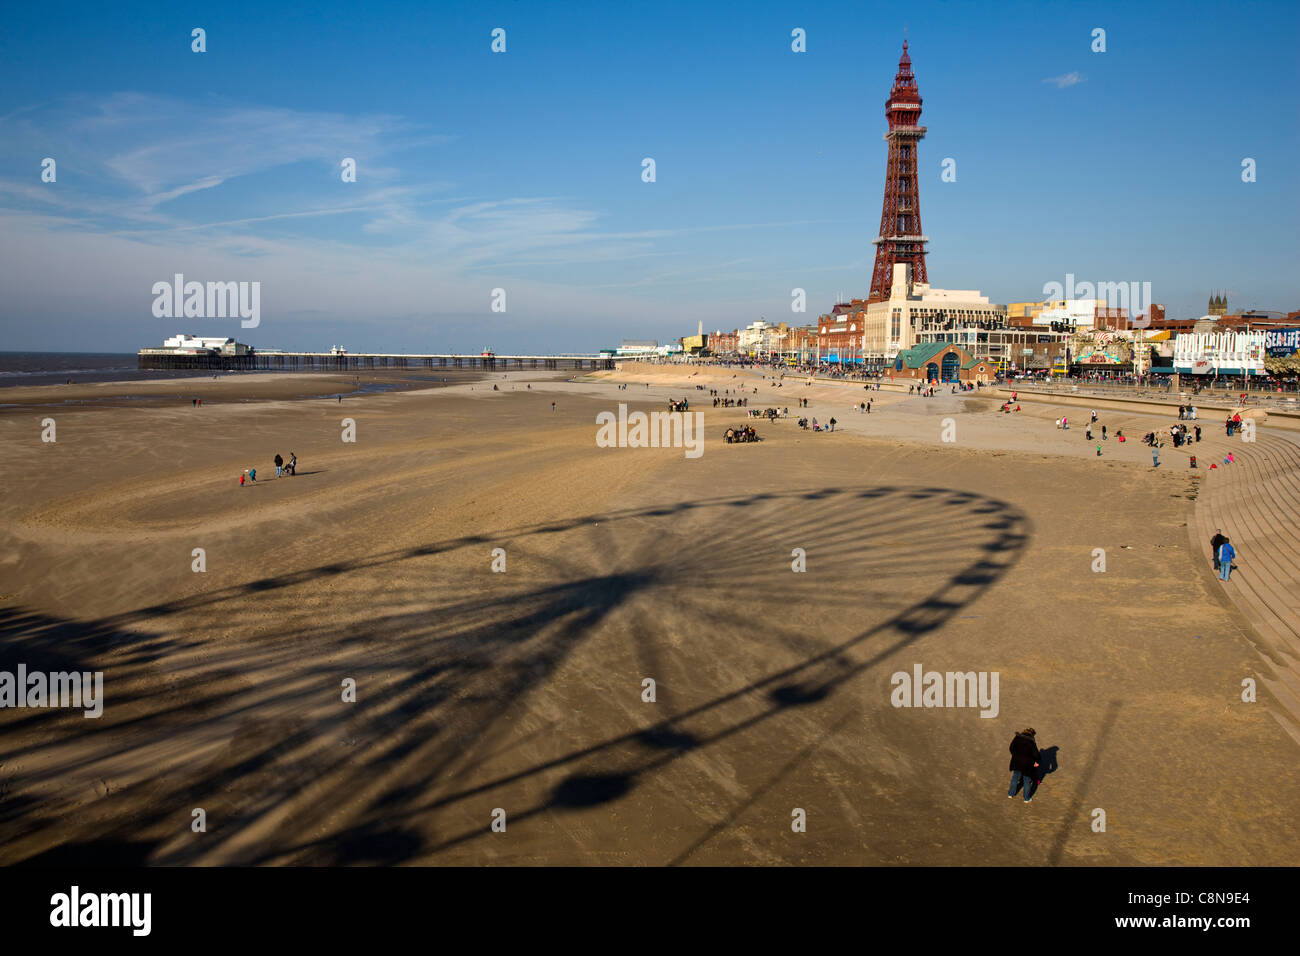 Shadow of the fairground ferris wheel on the beach with Blackpool beach and promenade in the background Stock Photo